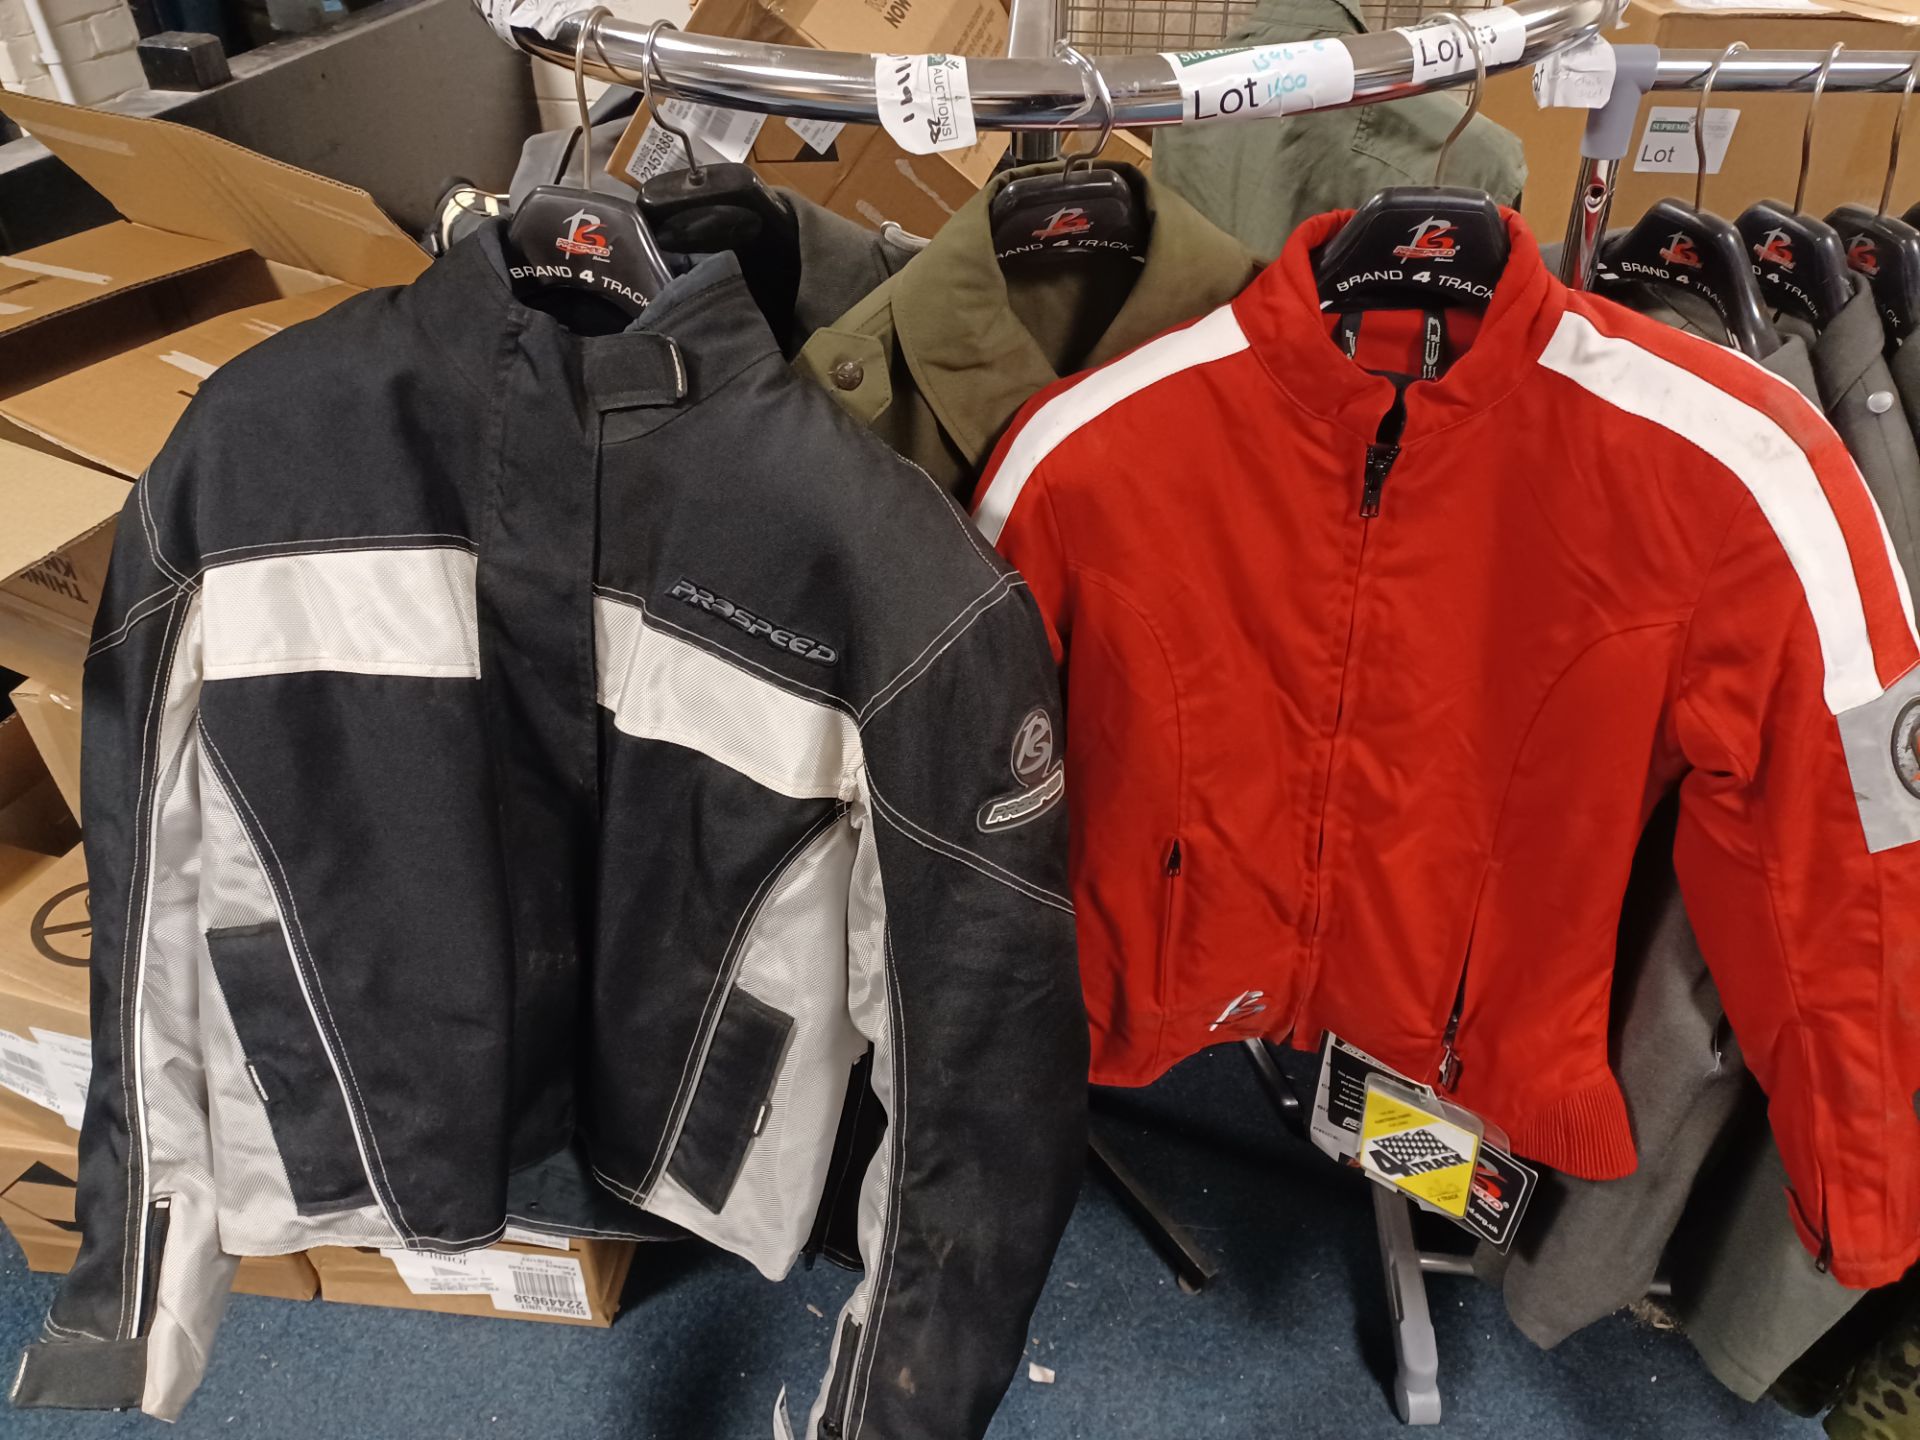 3 X BRAND NEW MOTO JACKETS IN VARIOUS STYLES AND SIZES EBR